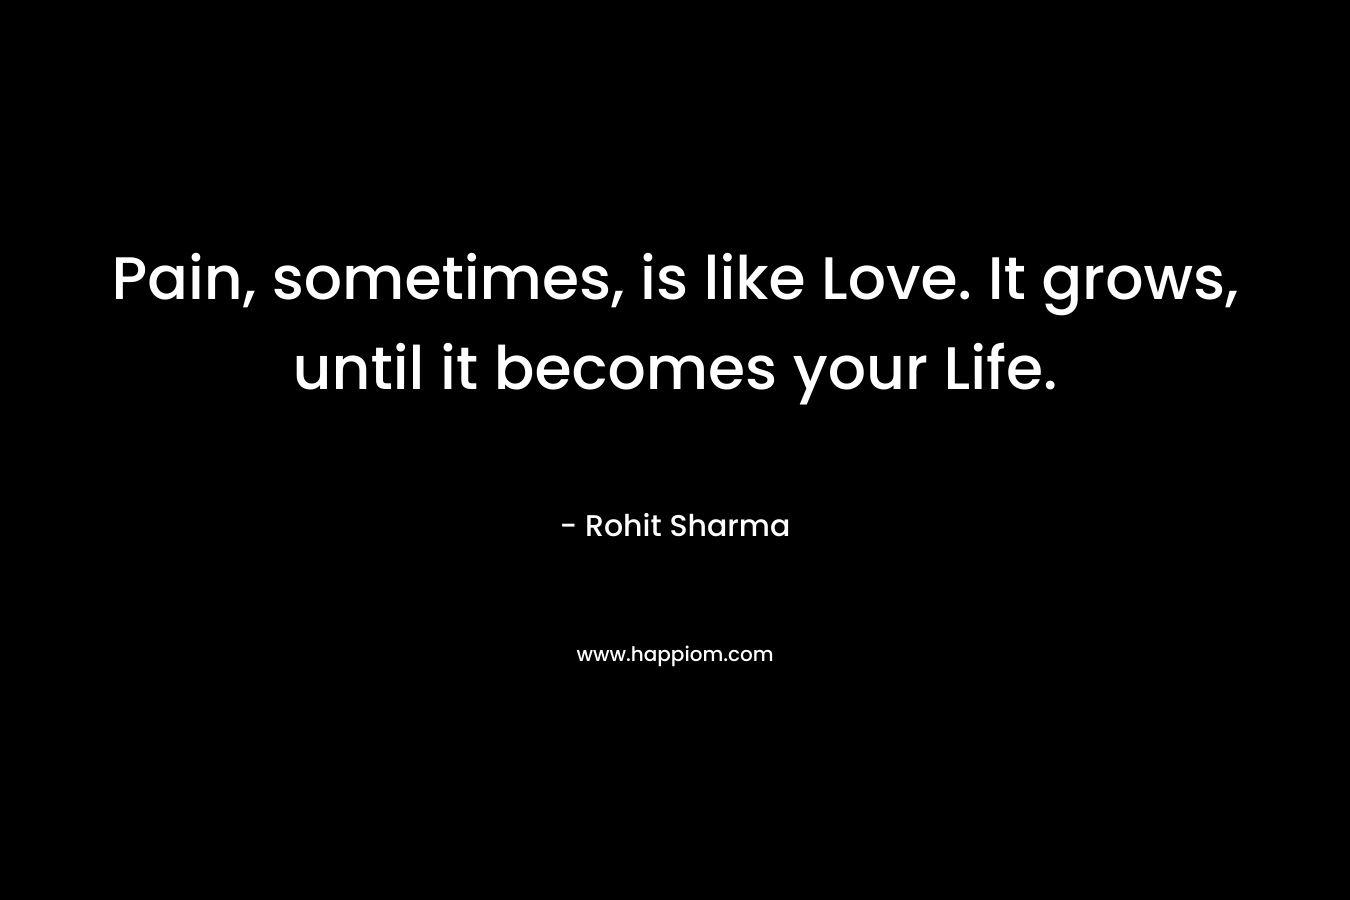 Pain, sometimes, is like Love. It grows, until it becomes your Life.